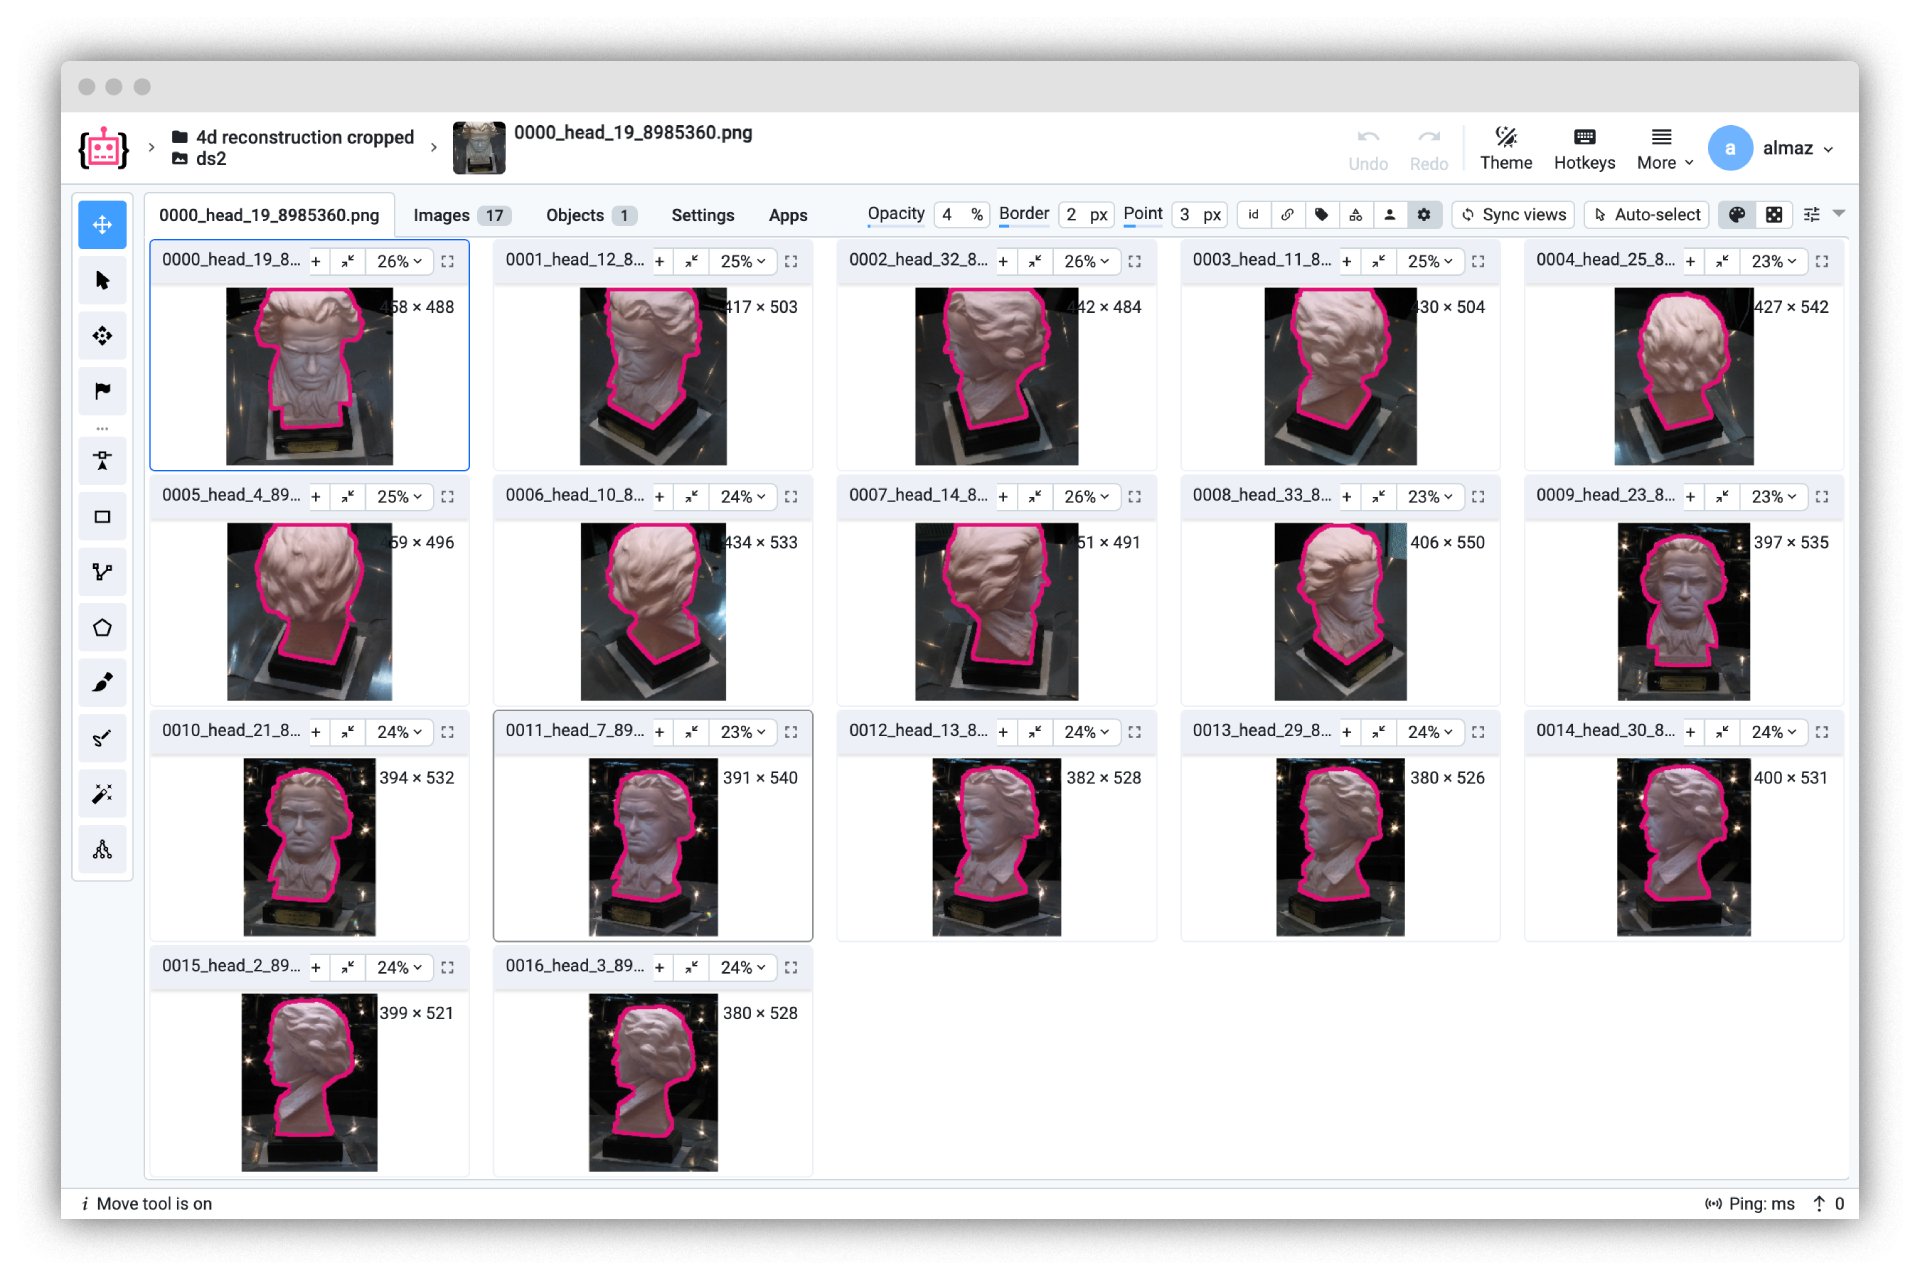 multi-view annotation for 3d reconstruction